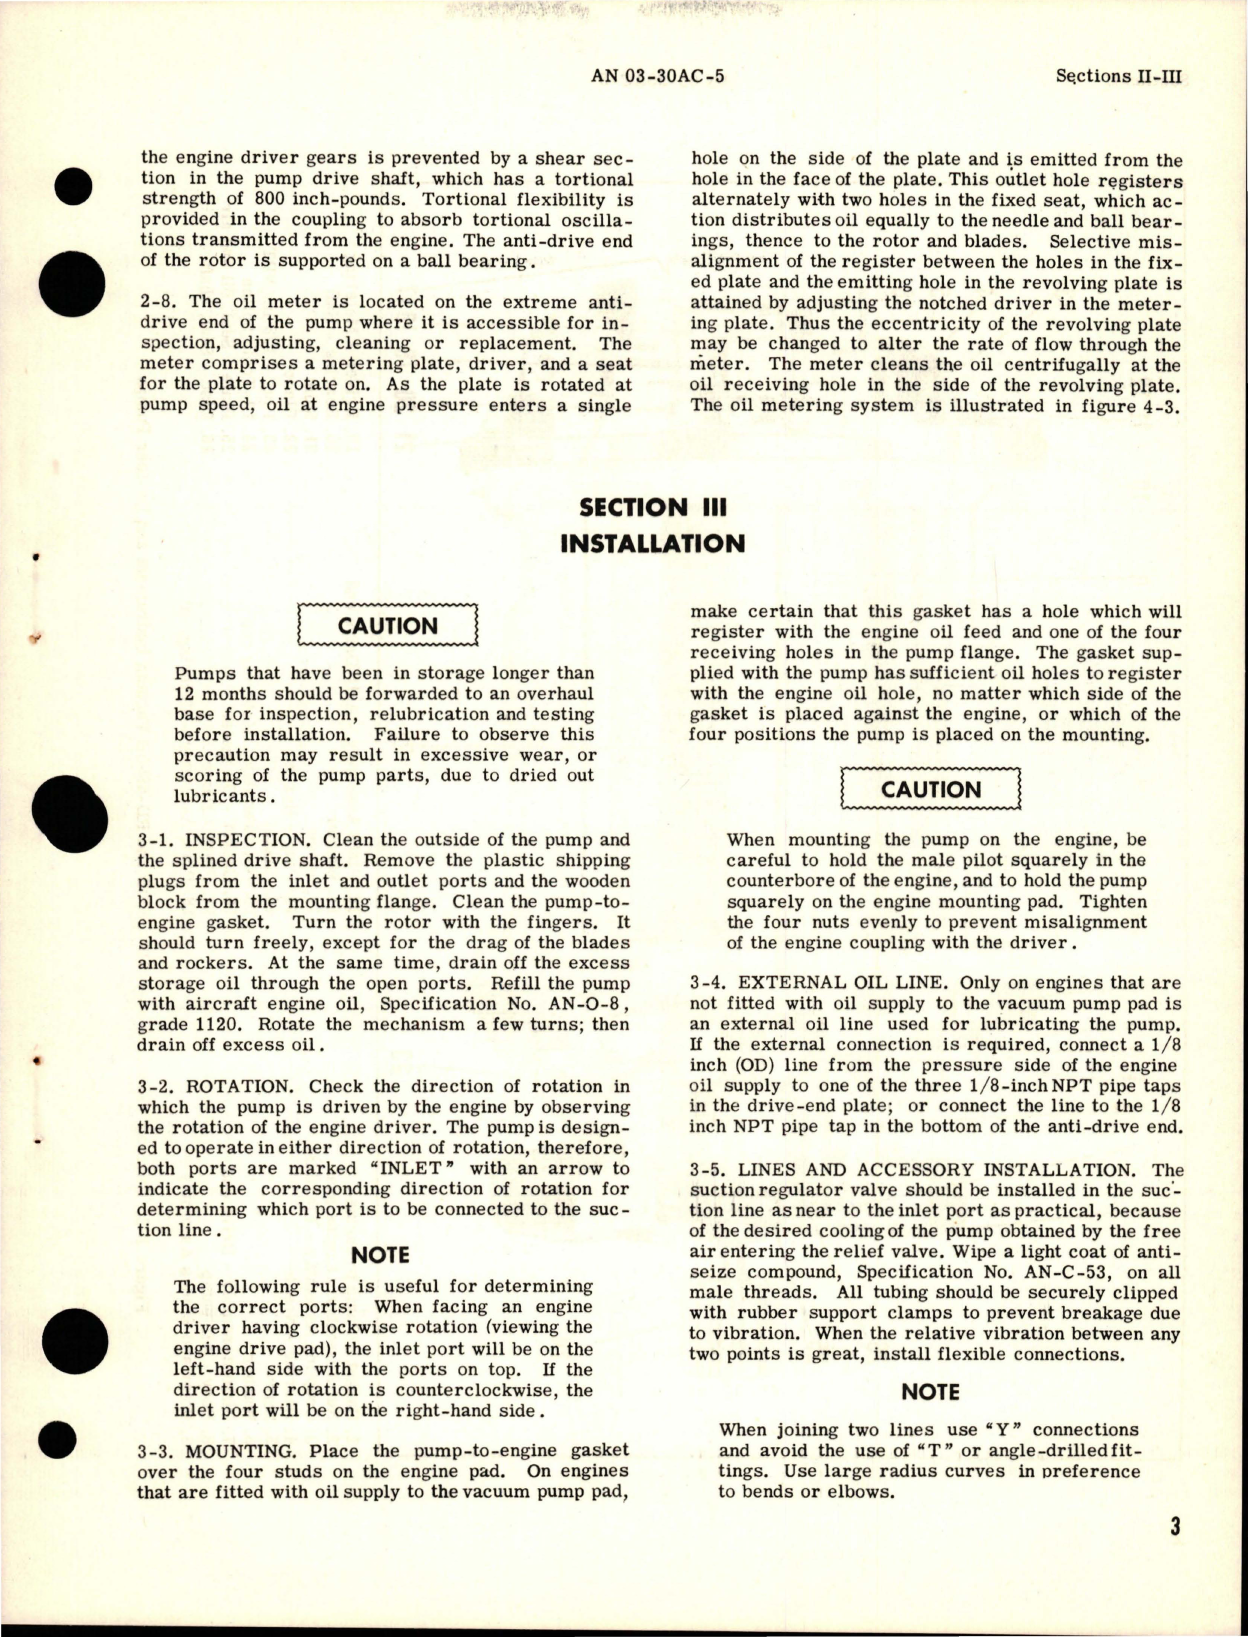 Sample page 7 from AirCorps Library document: Operation and Service Instructions for Vacuum Instrument & De-Icer Pumps - Models RD 3880B and RD 4990B